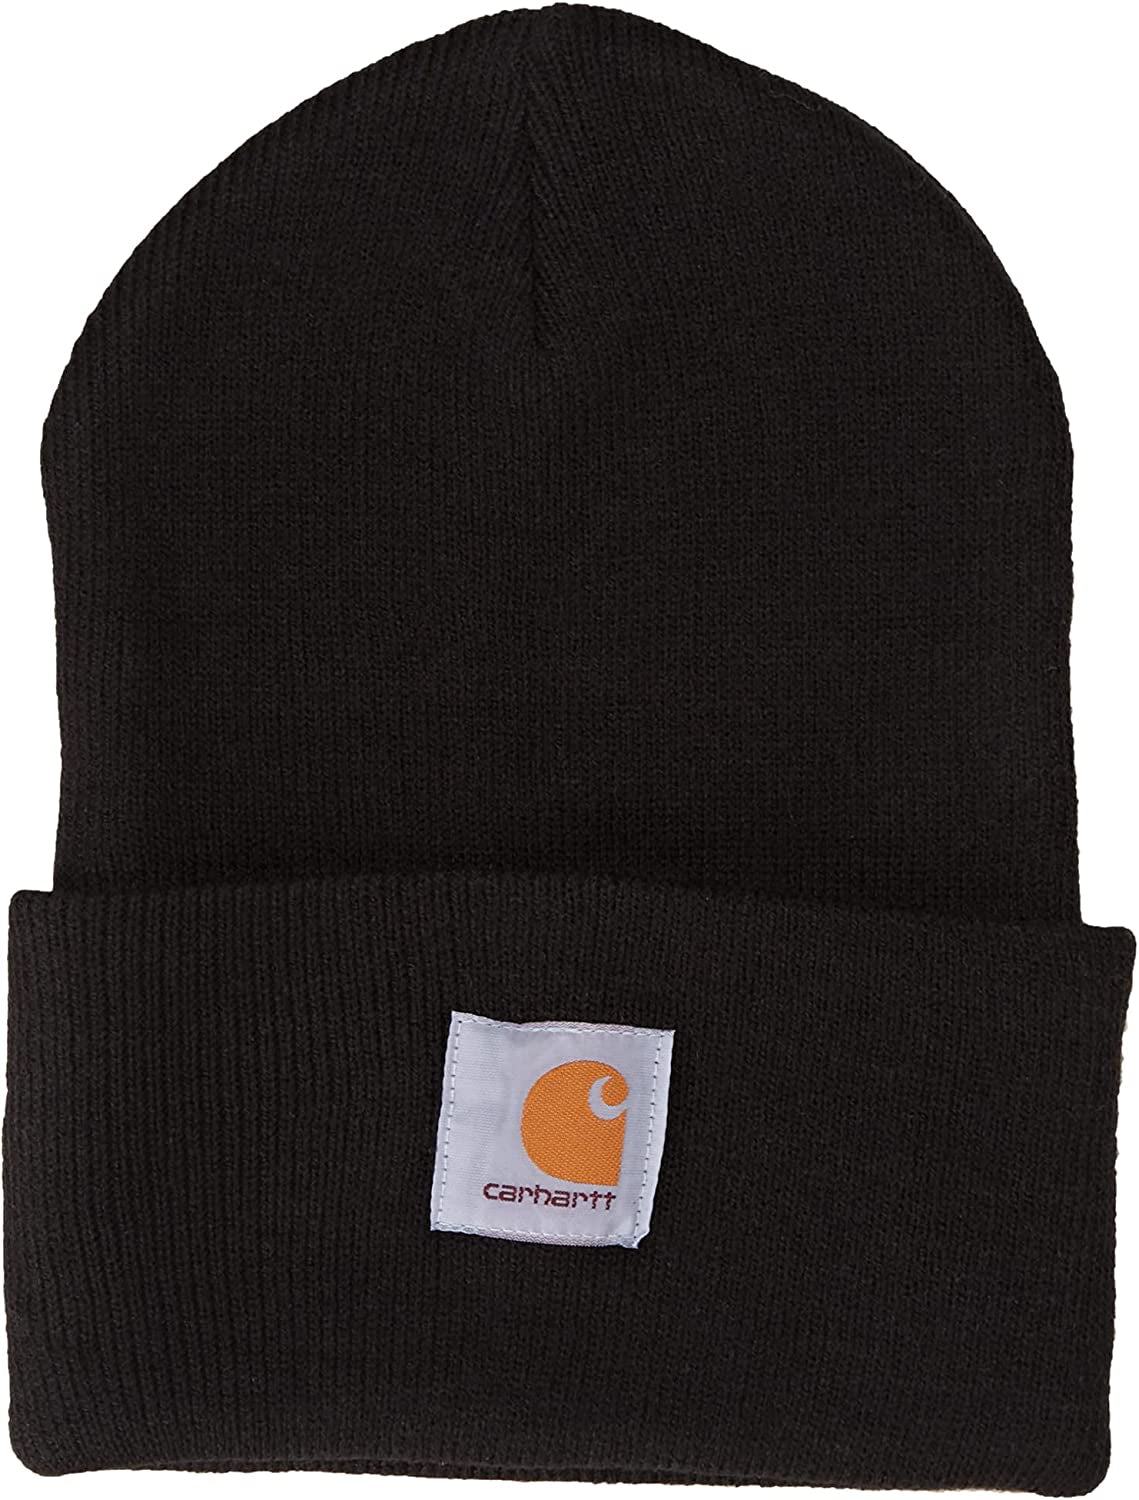 "Stay Warm and Stylish with Our Cozy Men's Knit Cuffed Beanie Hat!"